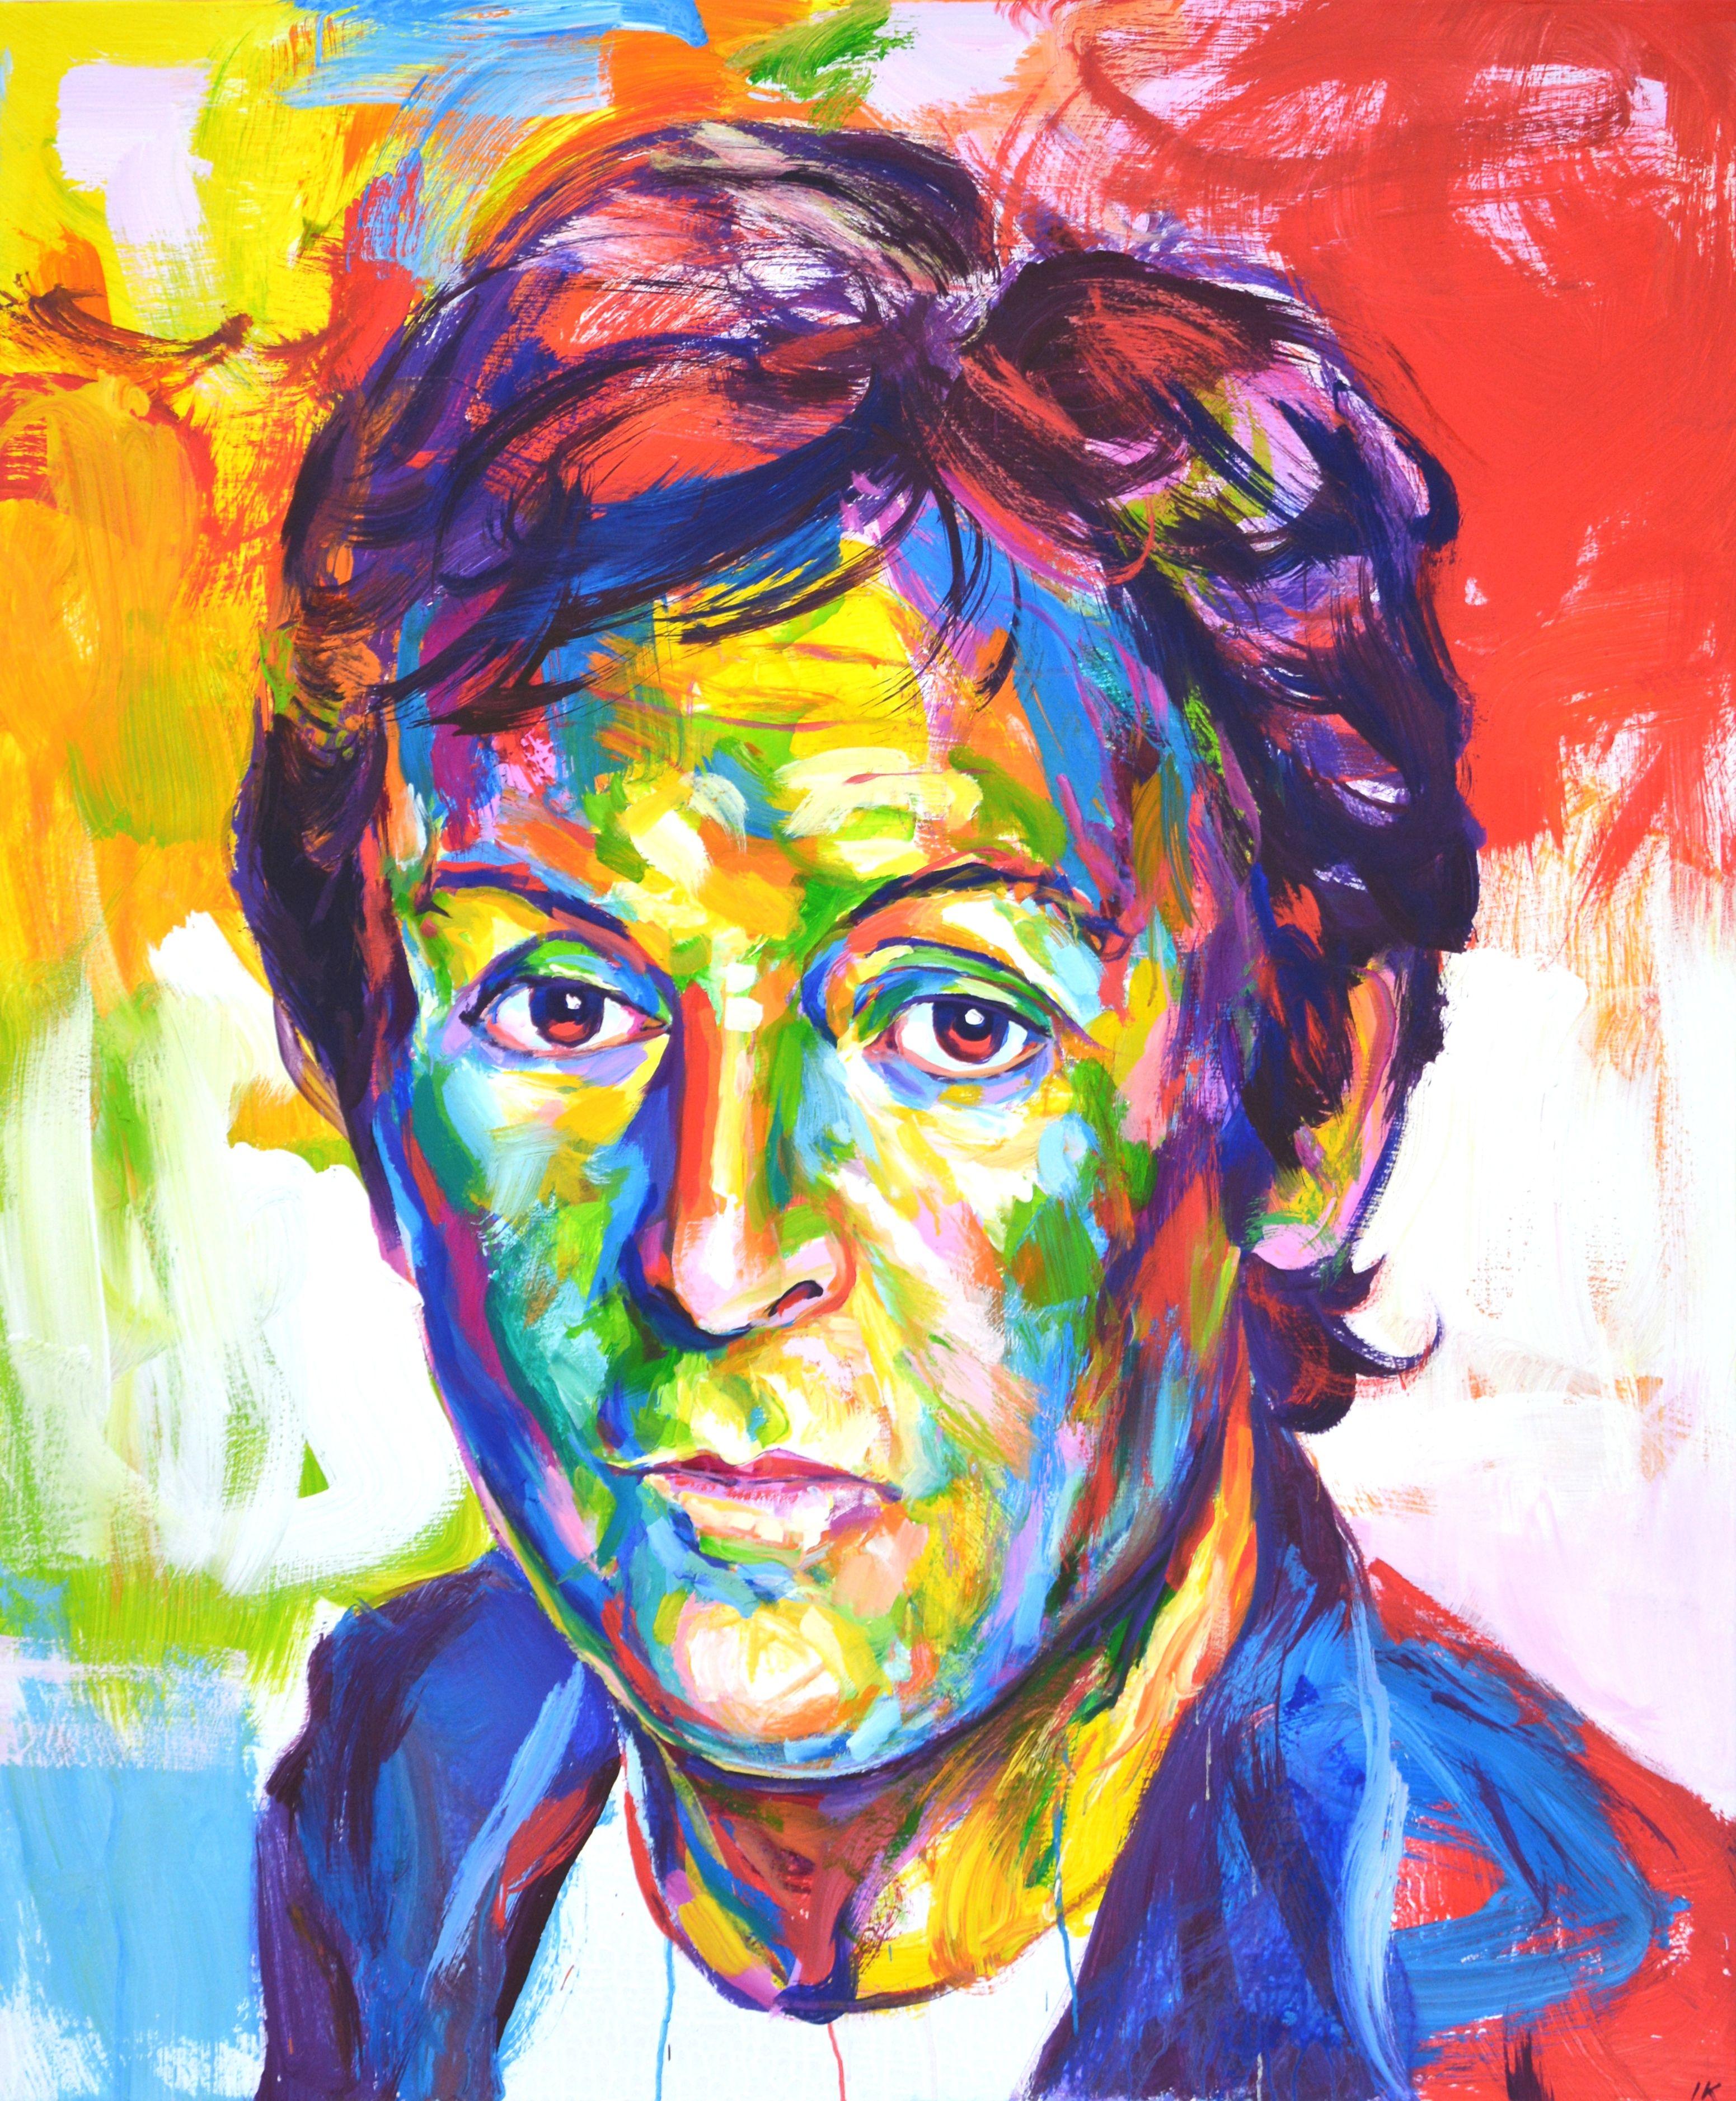 Sir James Paul McCartney is a British musician, multi-instrumentalist, writer and producer. One of the founders of The Beatles, 16-time Grammy Award winner, Knight Bachelor and Commander of the Order of the British Empire. Painted in a modern style